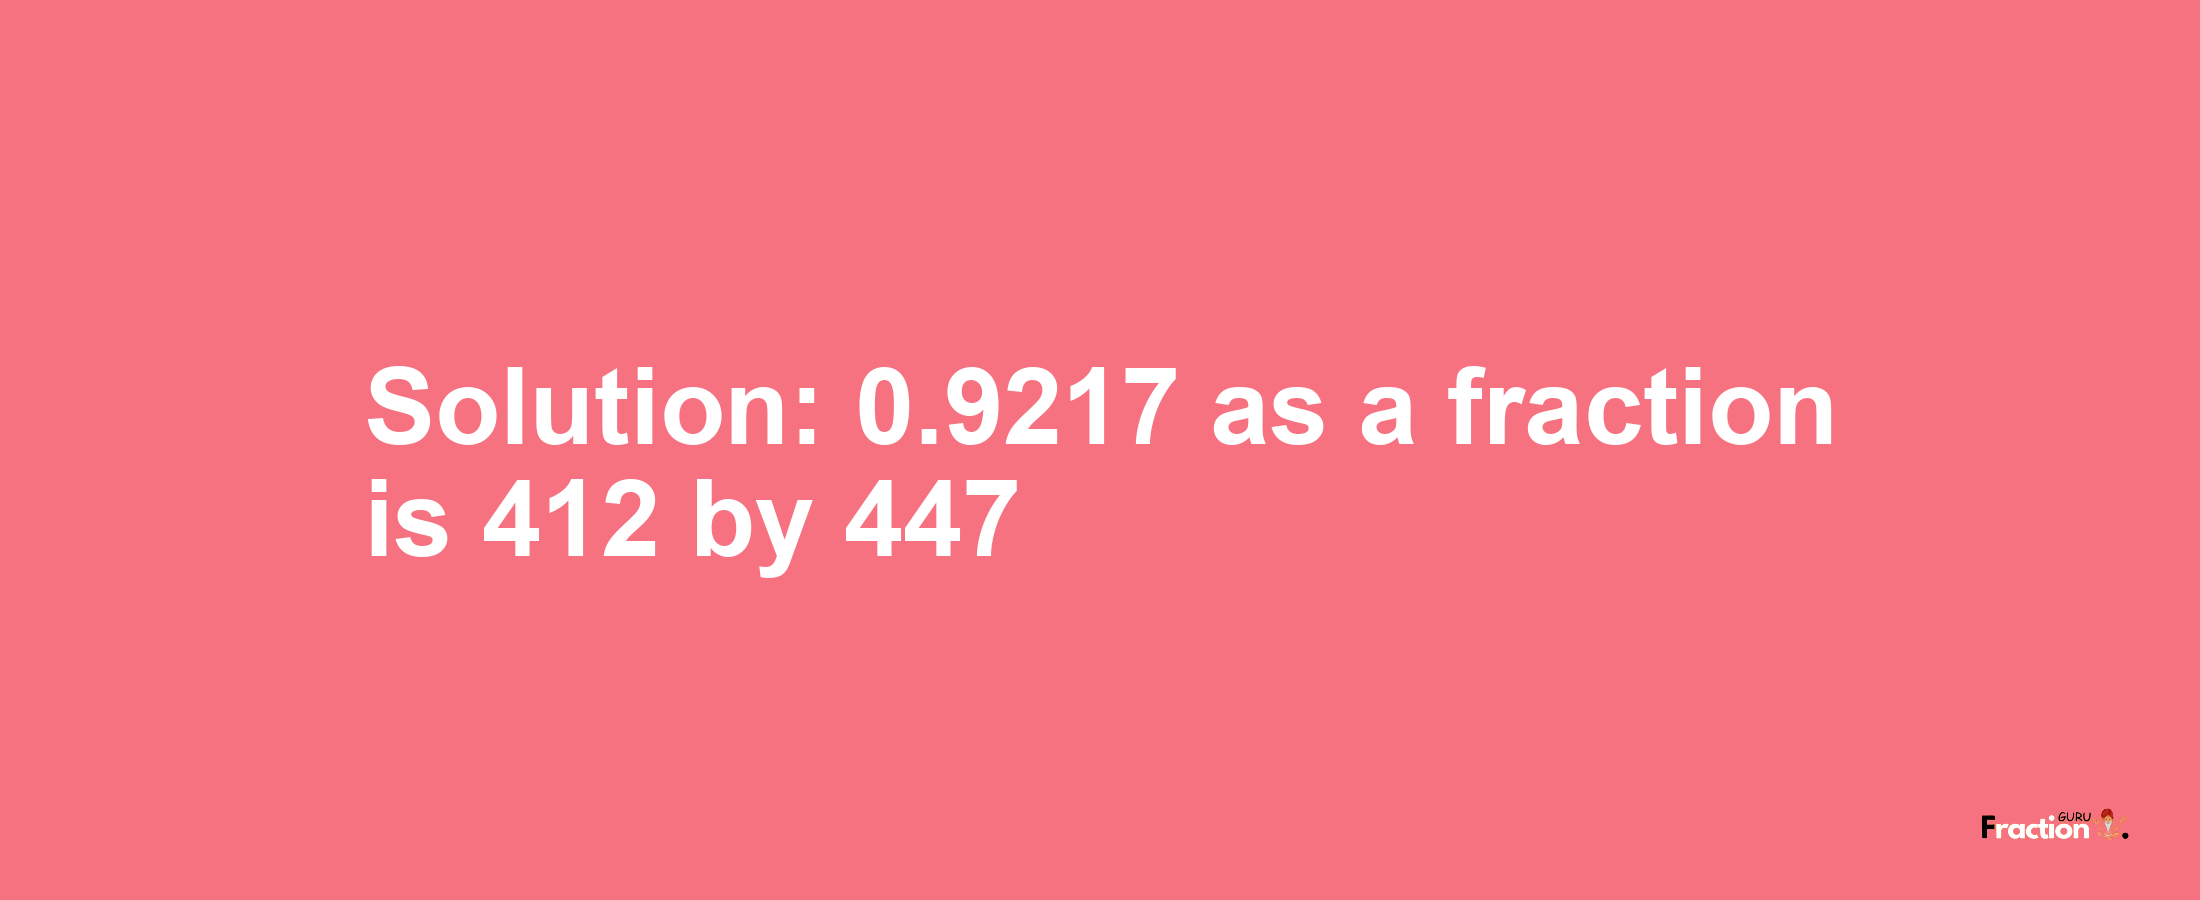 Solution:0.9217 as a fraction is 412/447